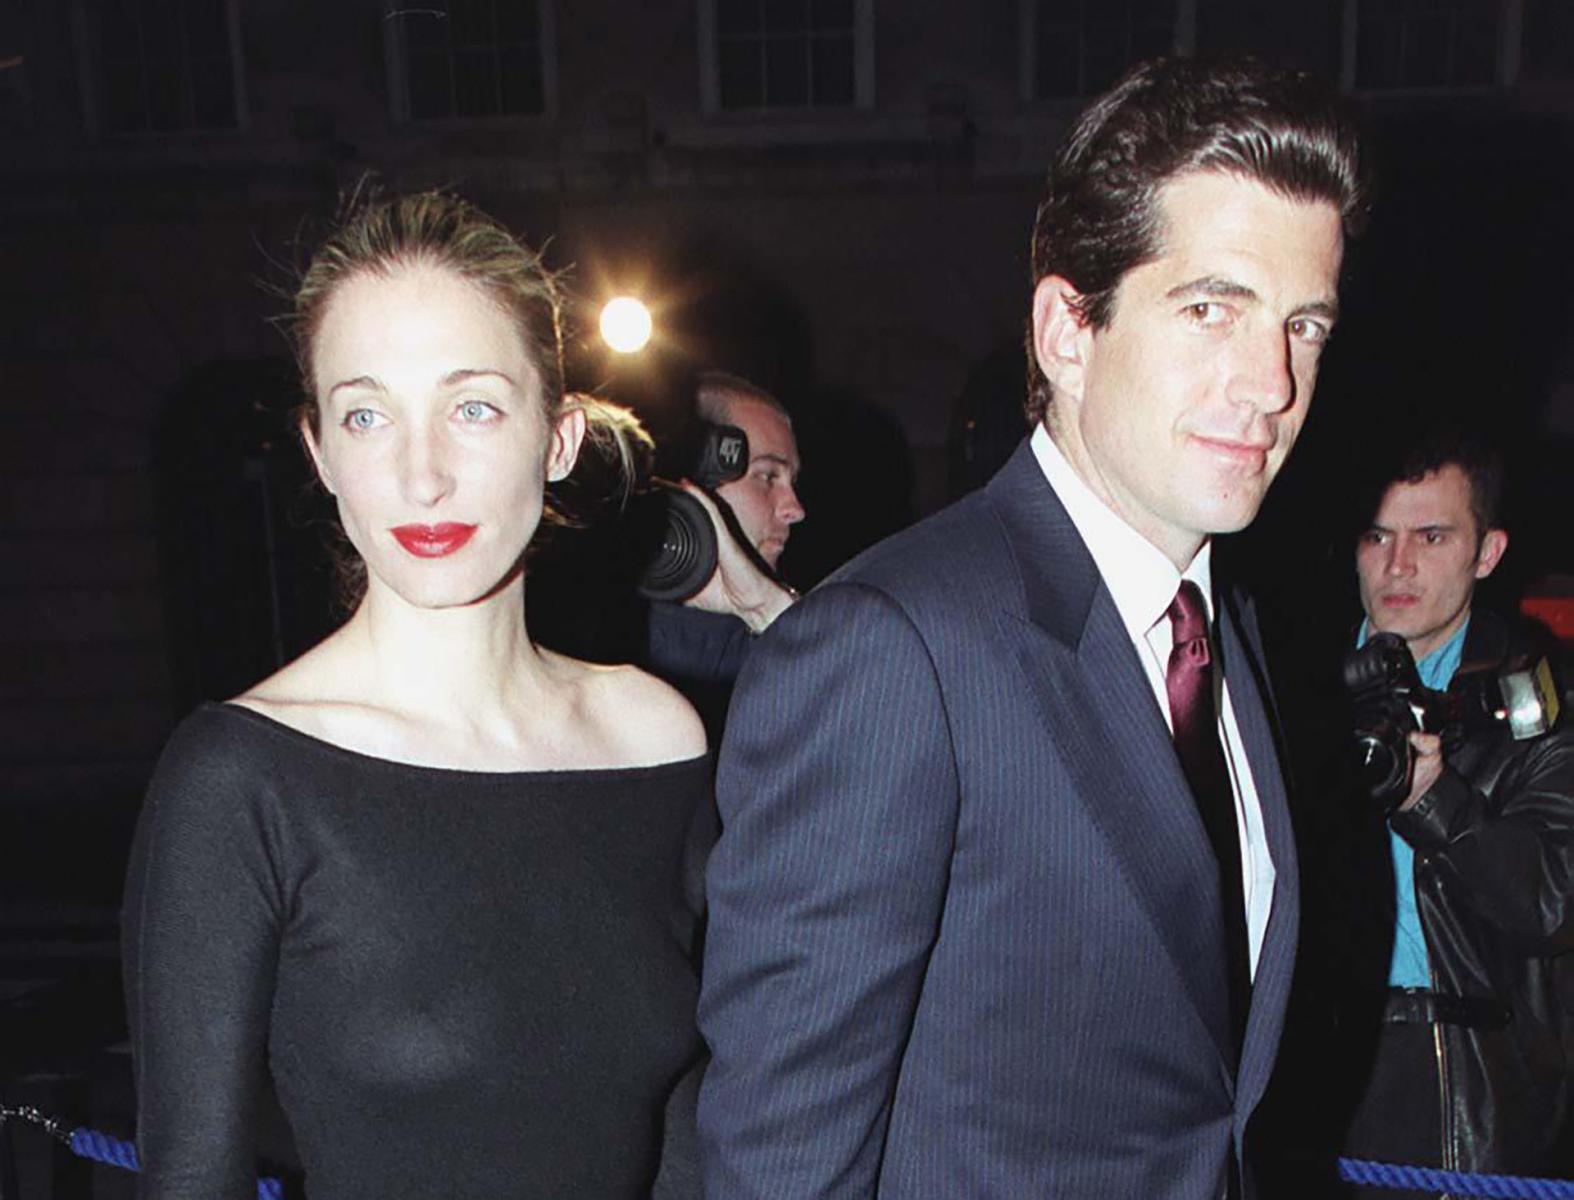 Celeb Fashion History 101: These Couples Ruled the Red Carpet - image 5